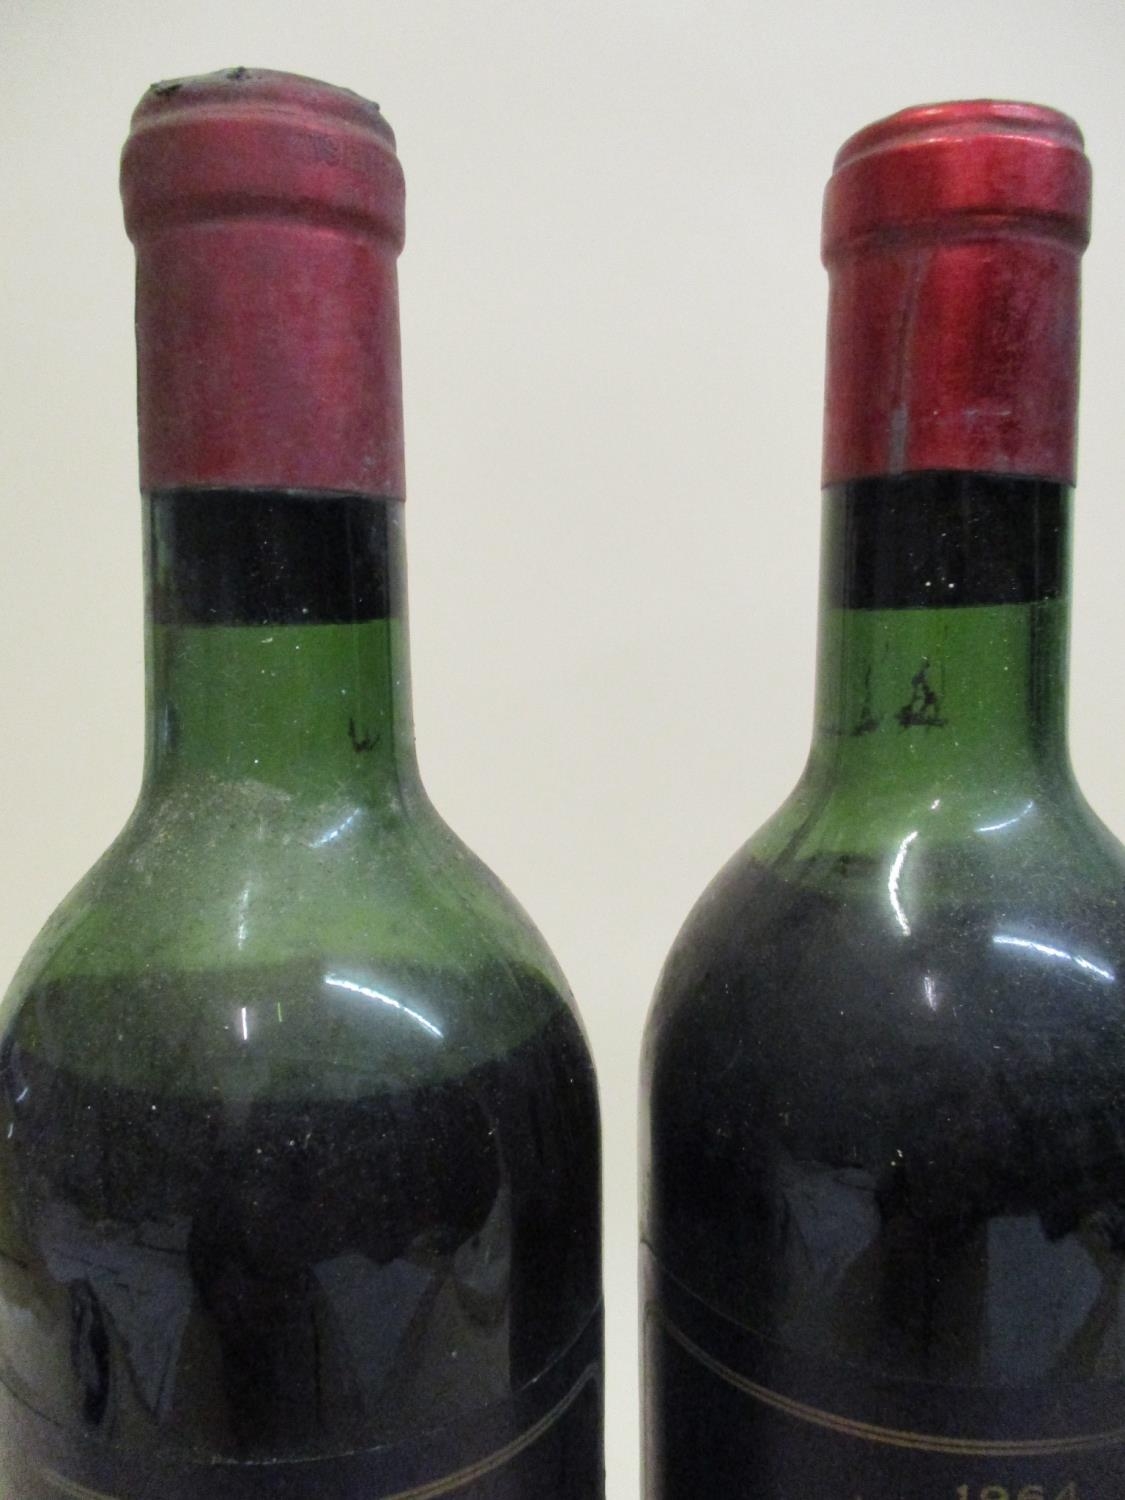 Two bottles of Chateau Palmer 1964 Margaux Medoc Location: L.4 - Image 2 of 2